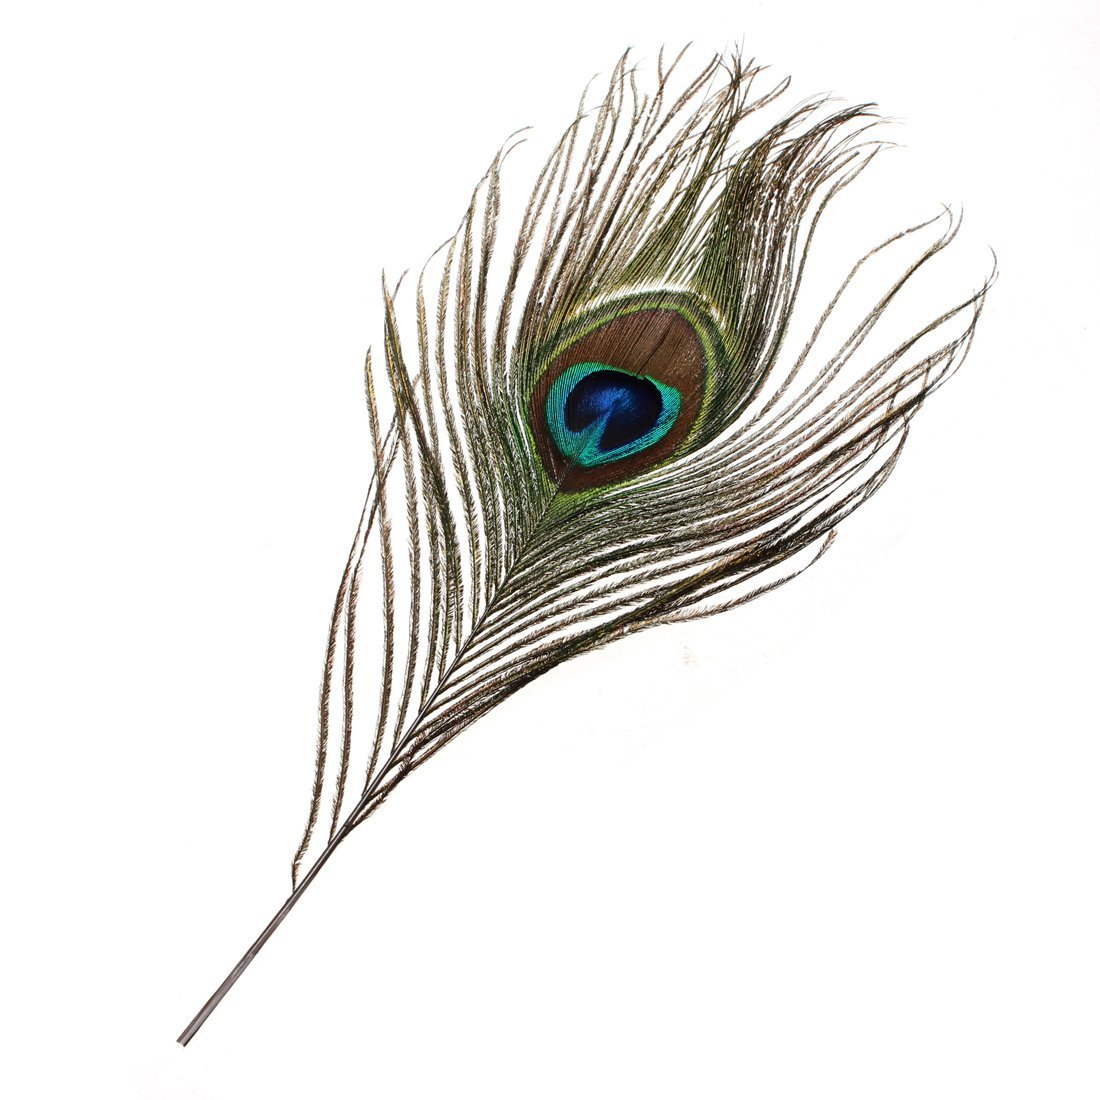  : Pack of 30pc Natural Peacock Feathers 10-12